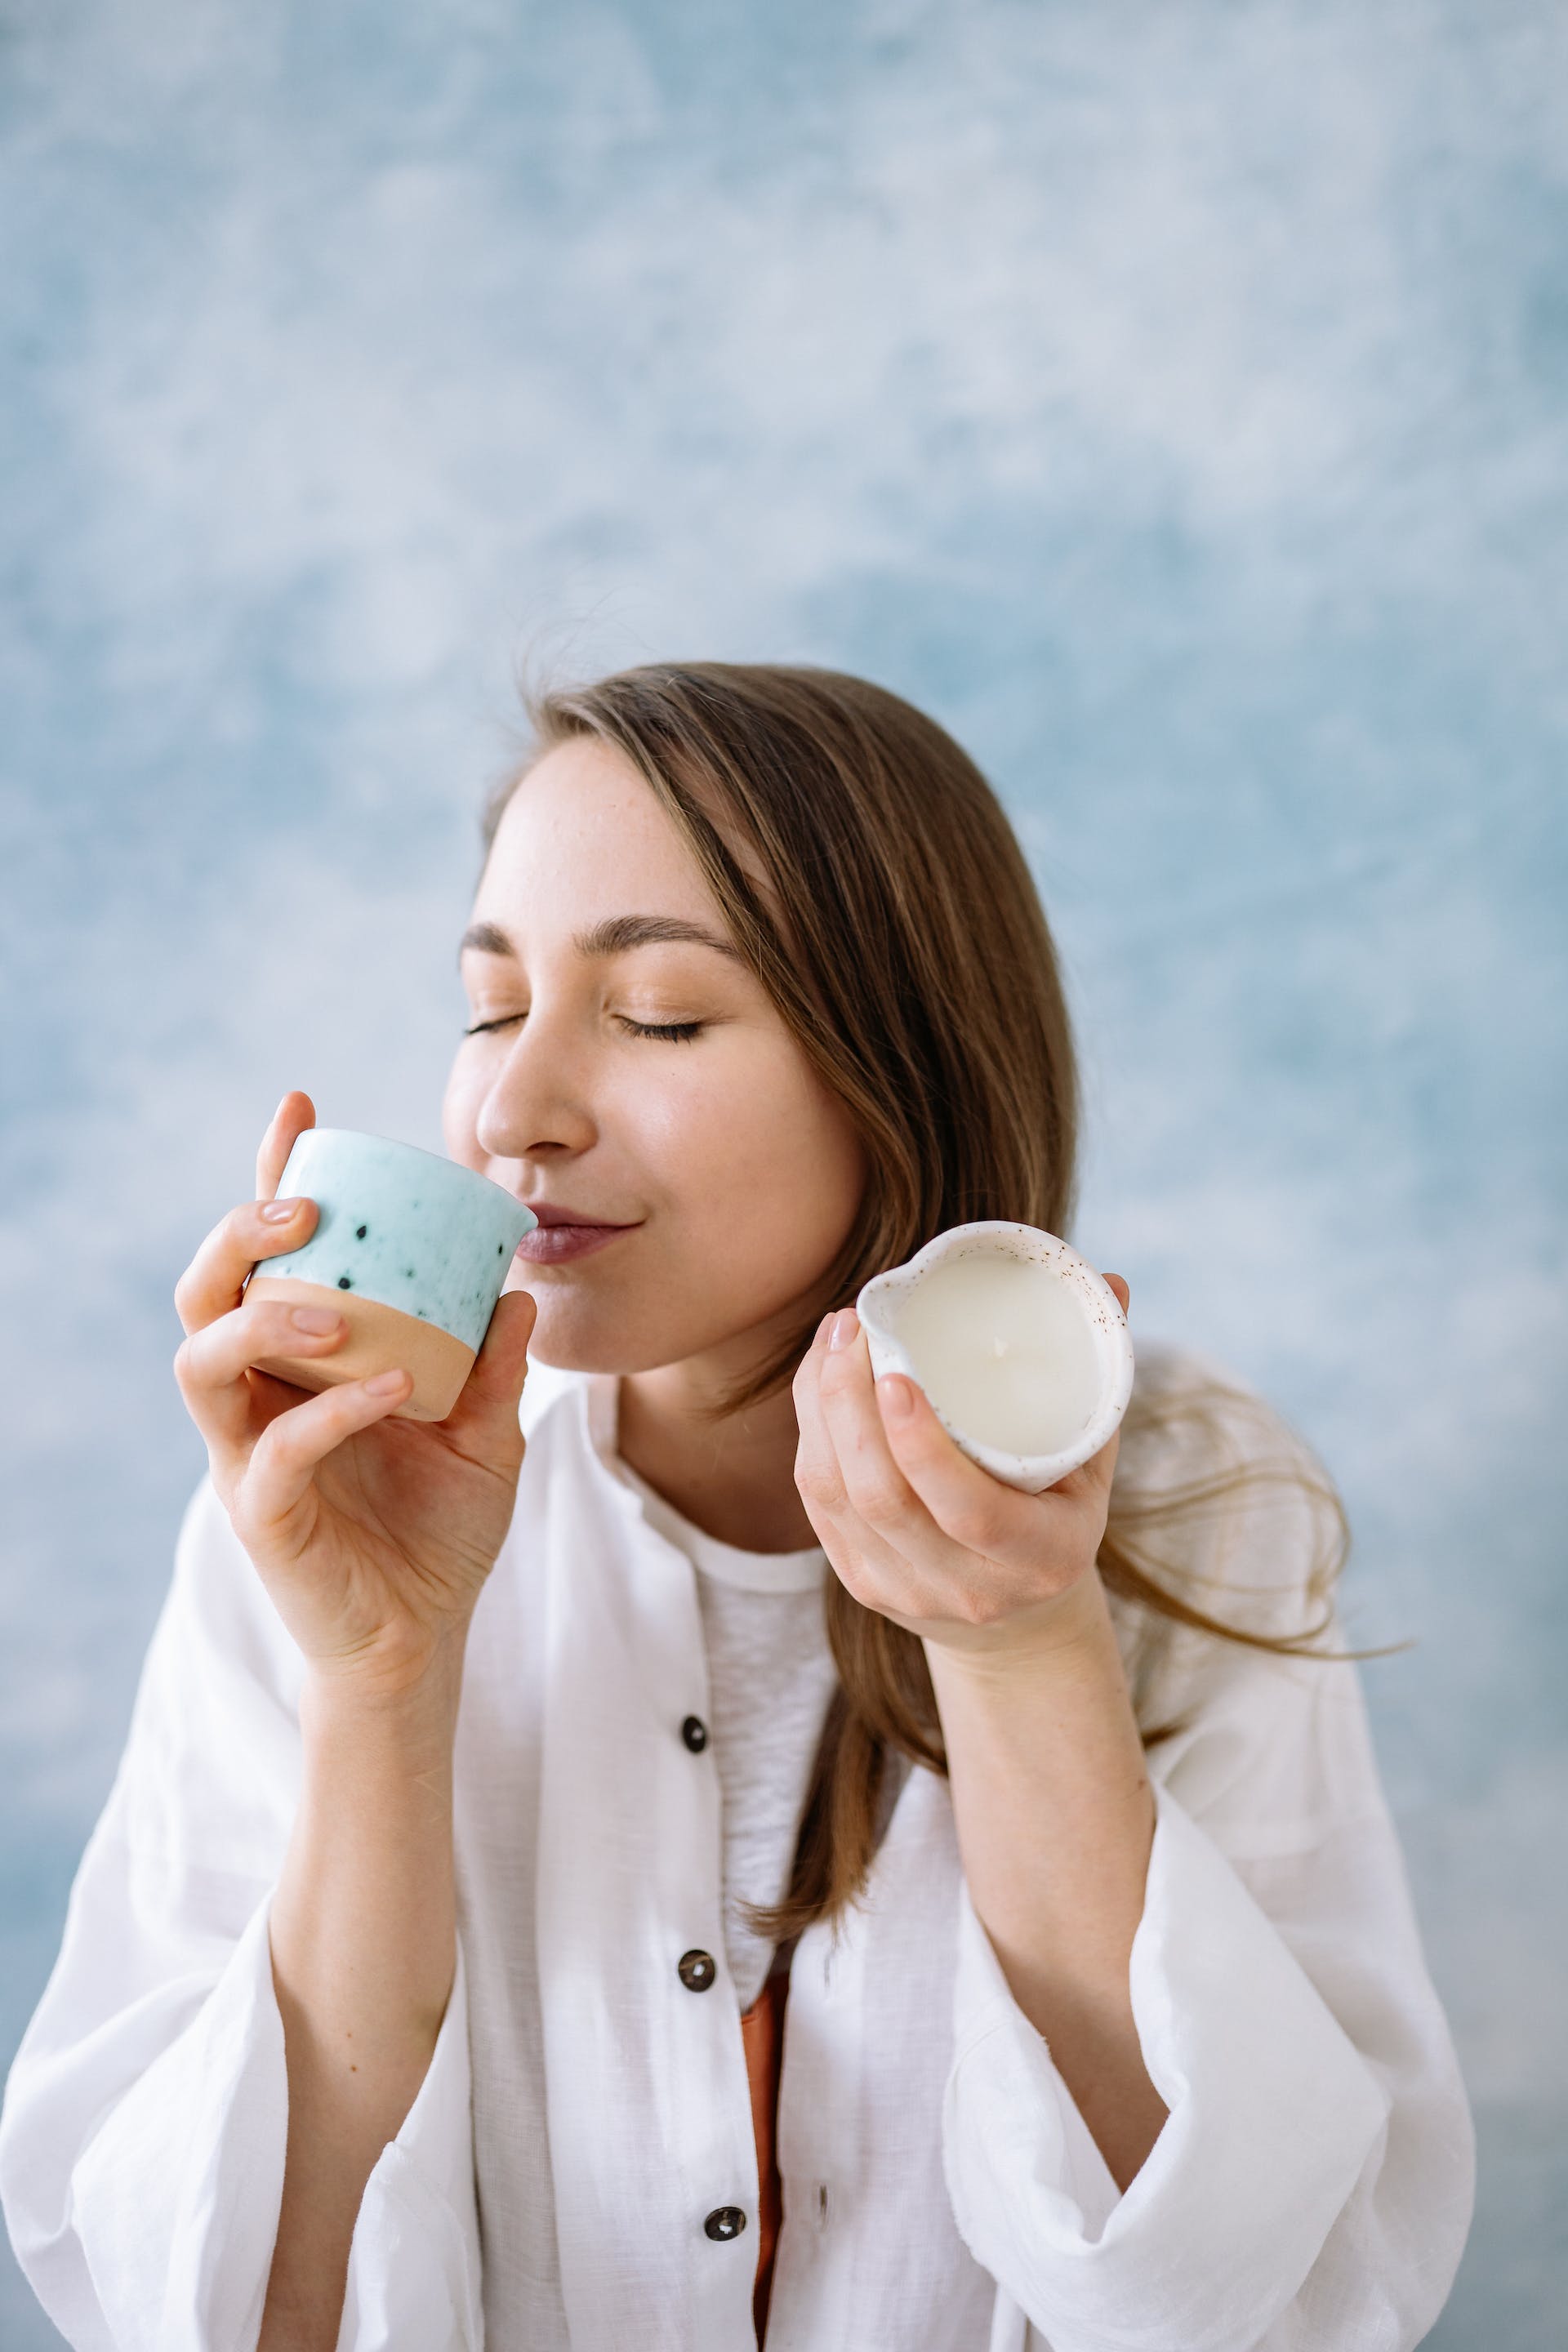 A woman smelling scented candles | Source: Pexels